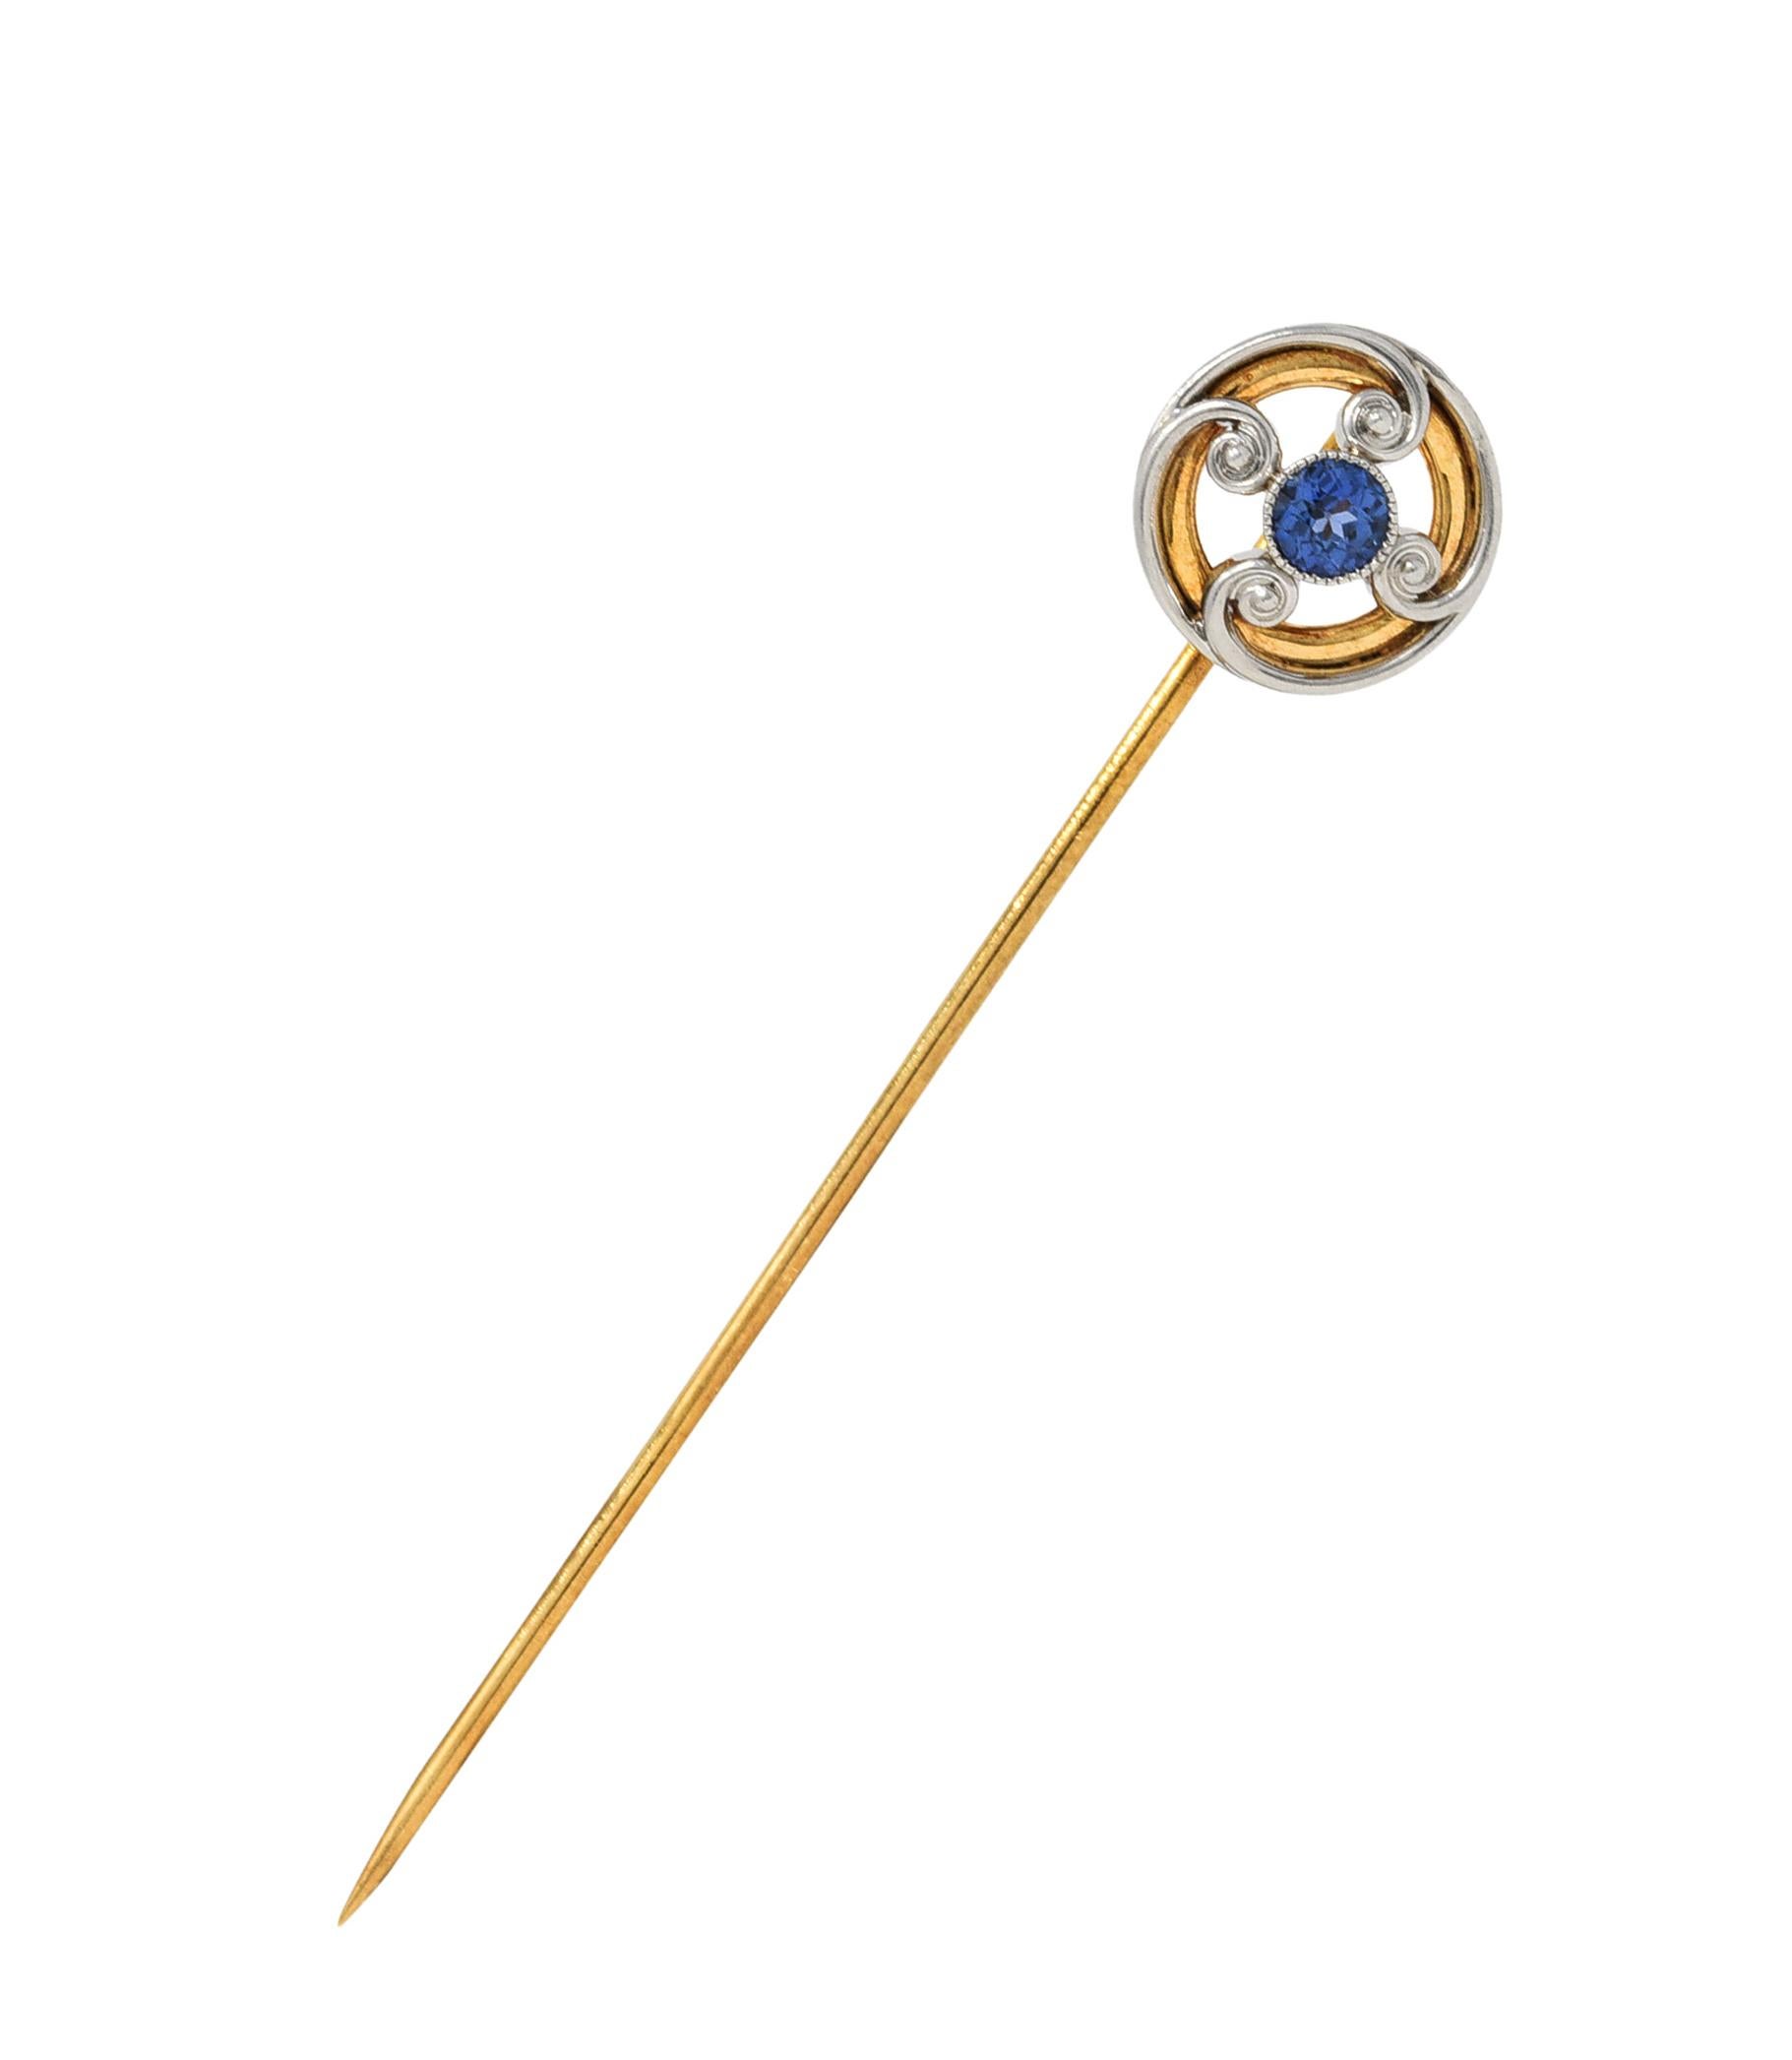 Centering a round cut sapphire weighing approximately 0.30 carat

Very eye-clean and strongly violetish blue in color

Bezel set and surrounded by four scrolling volute motifs

Tested as platinum-topped 14 karat gold

Maker's mark for Whiteside &